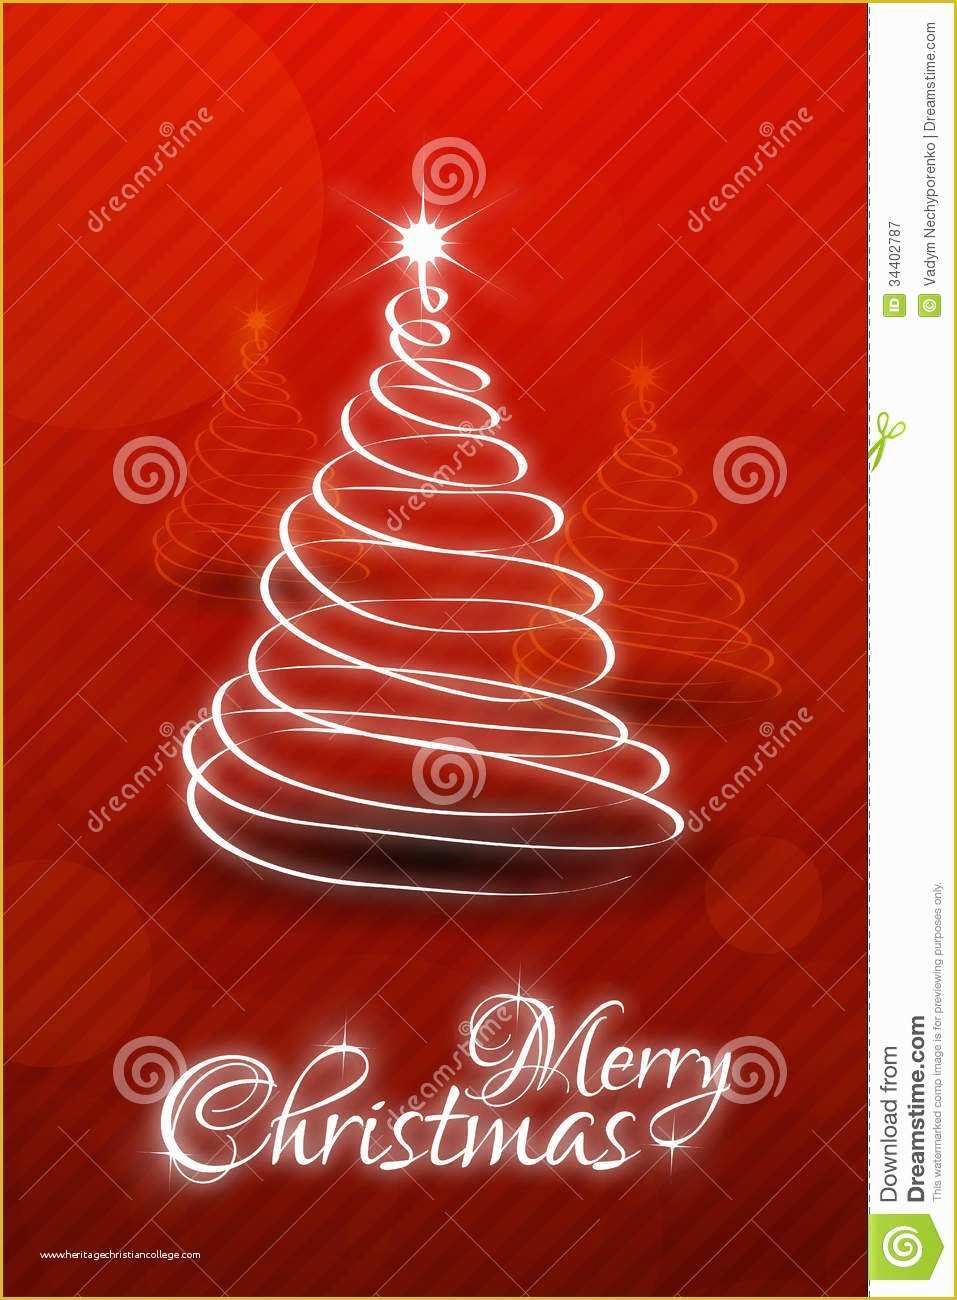 Free Photo Templates Of Christmas Card Template Stock Vector Image Of Copy